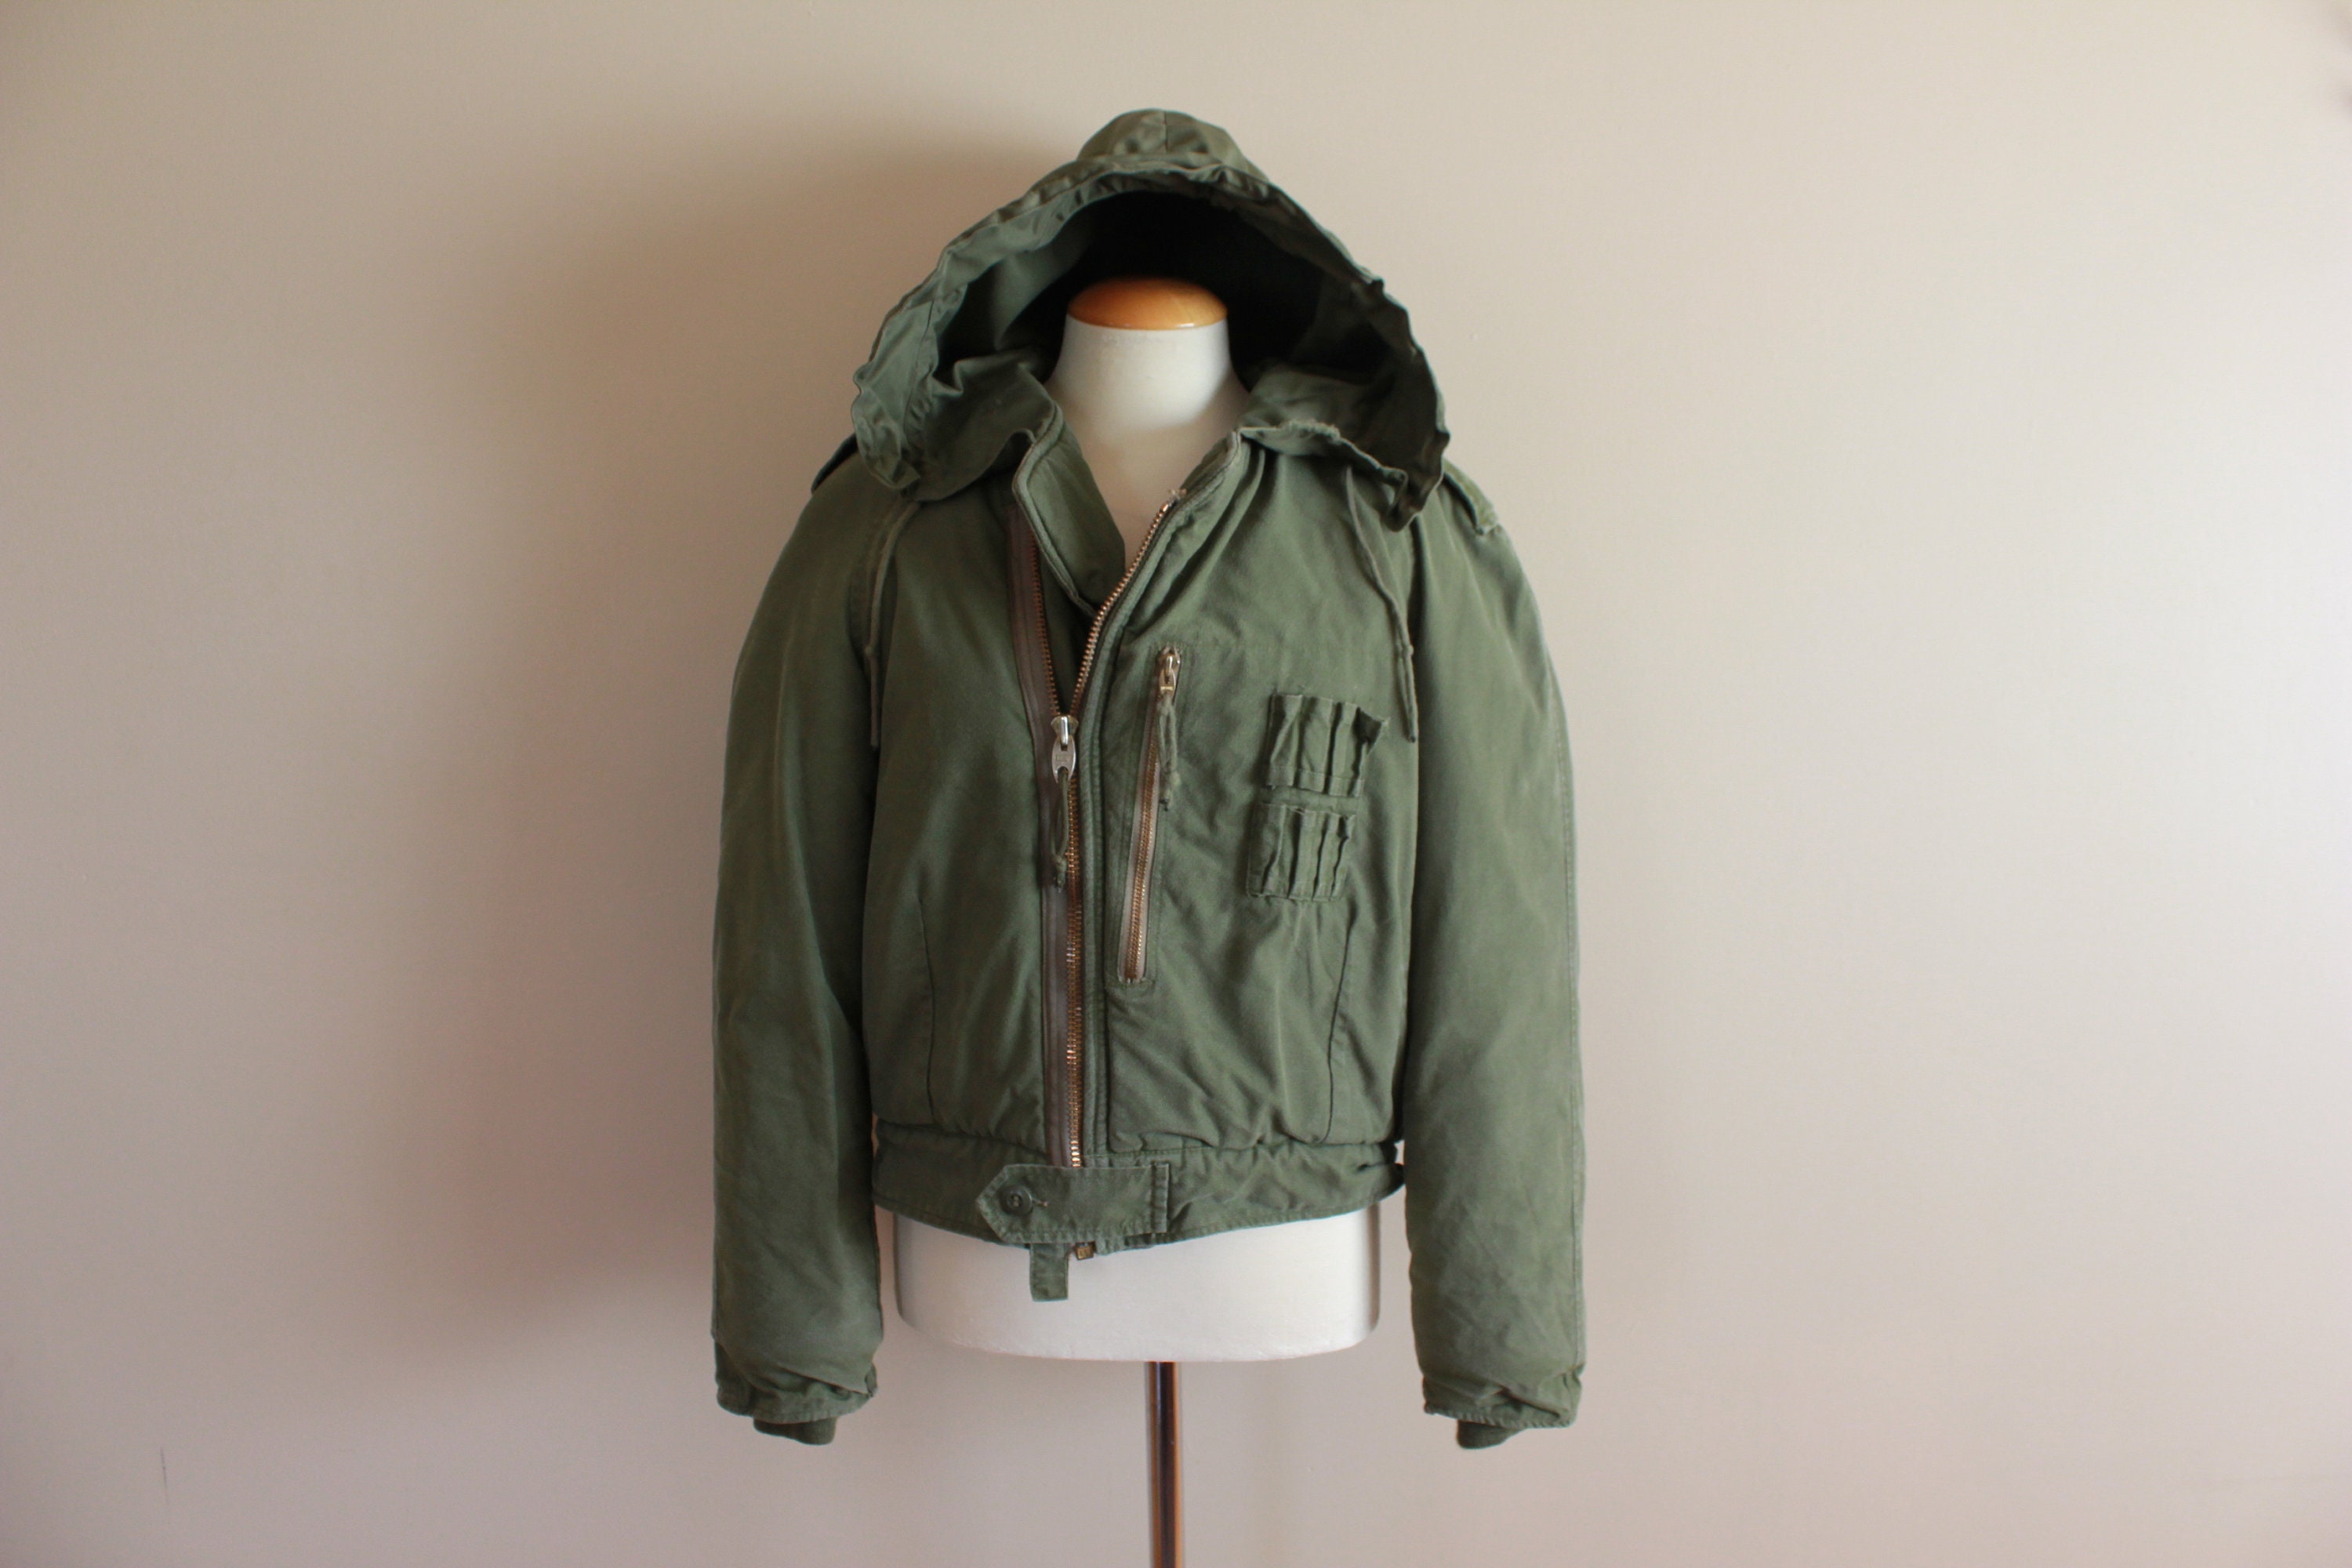 Vintage 1969 Canadian Military Tank Jacket. Hooded Bomber Asymmetrical Zip  Up Cold Weather AFV Crew Army Green Jacket. Fits Small